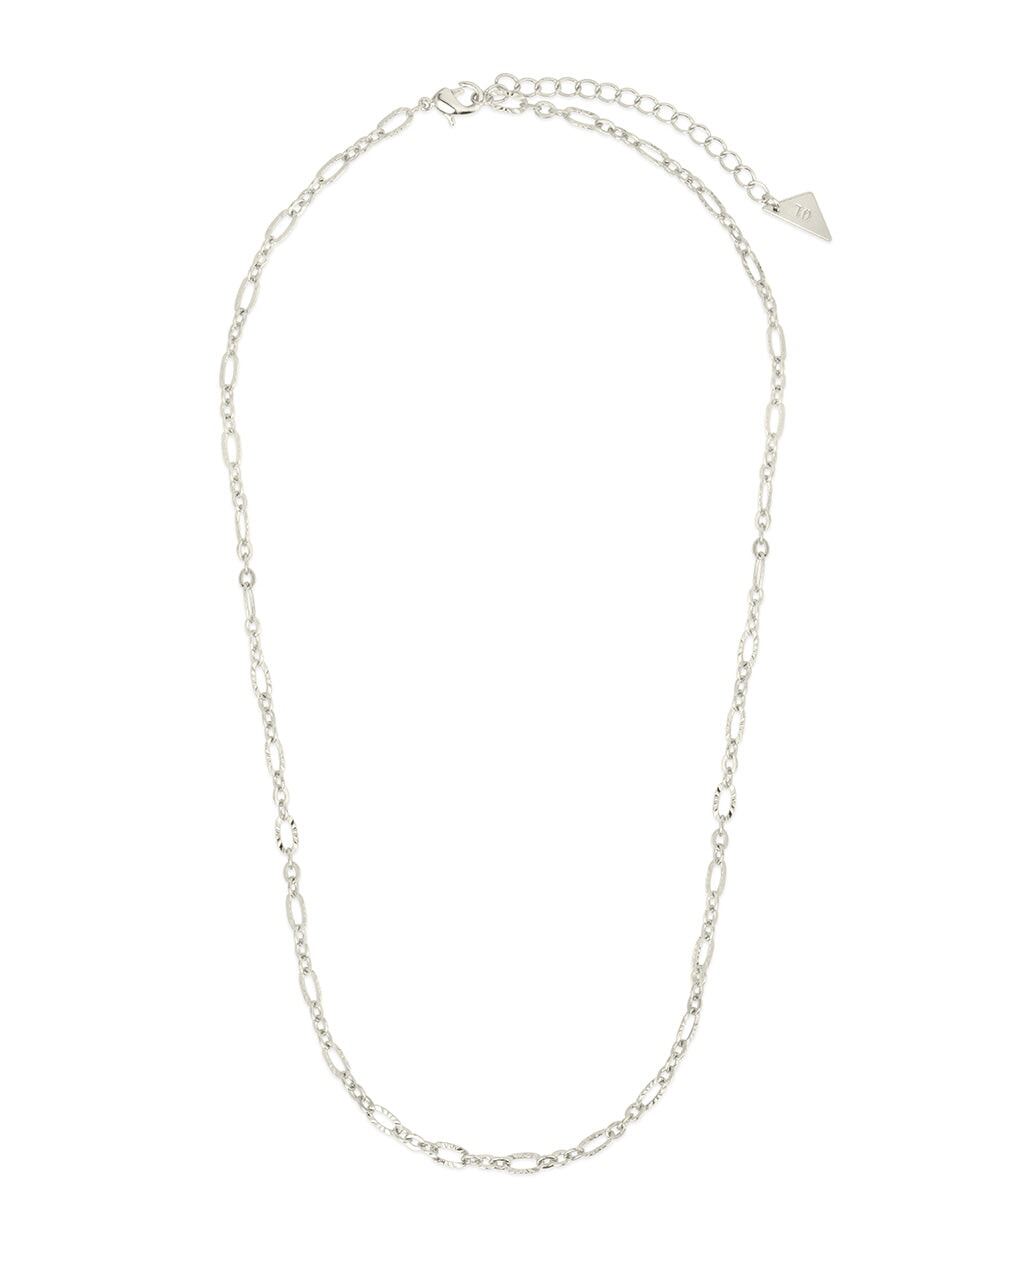 Elysia Chain Necklace Necklace Sterling Forever 